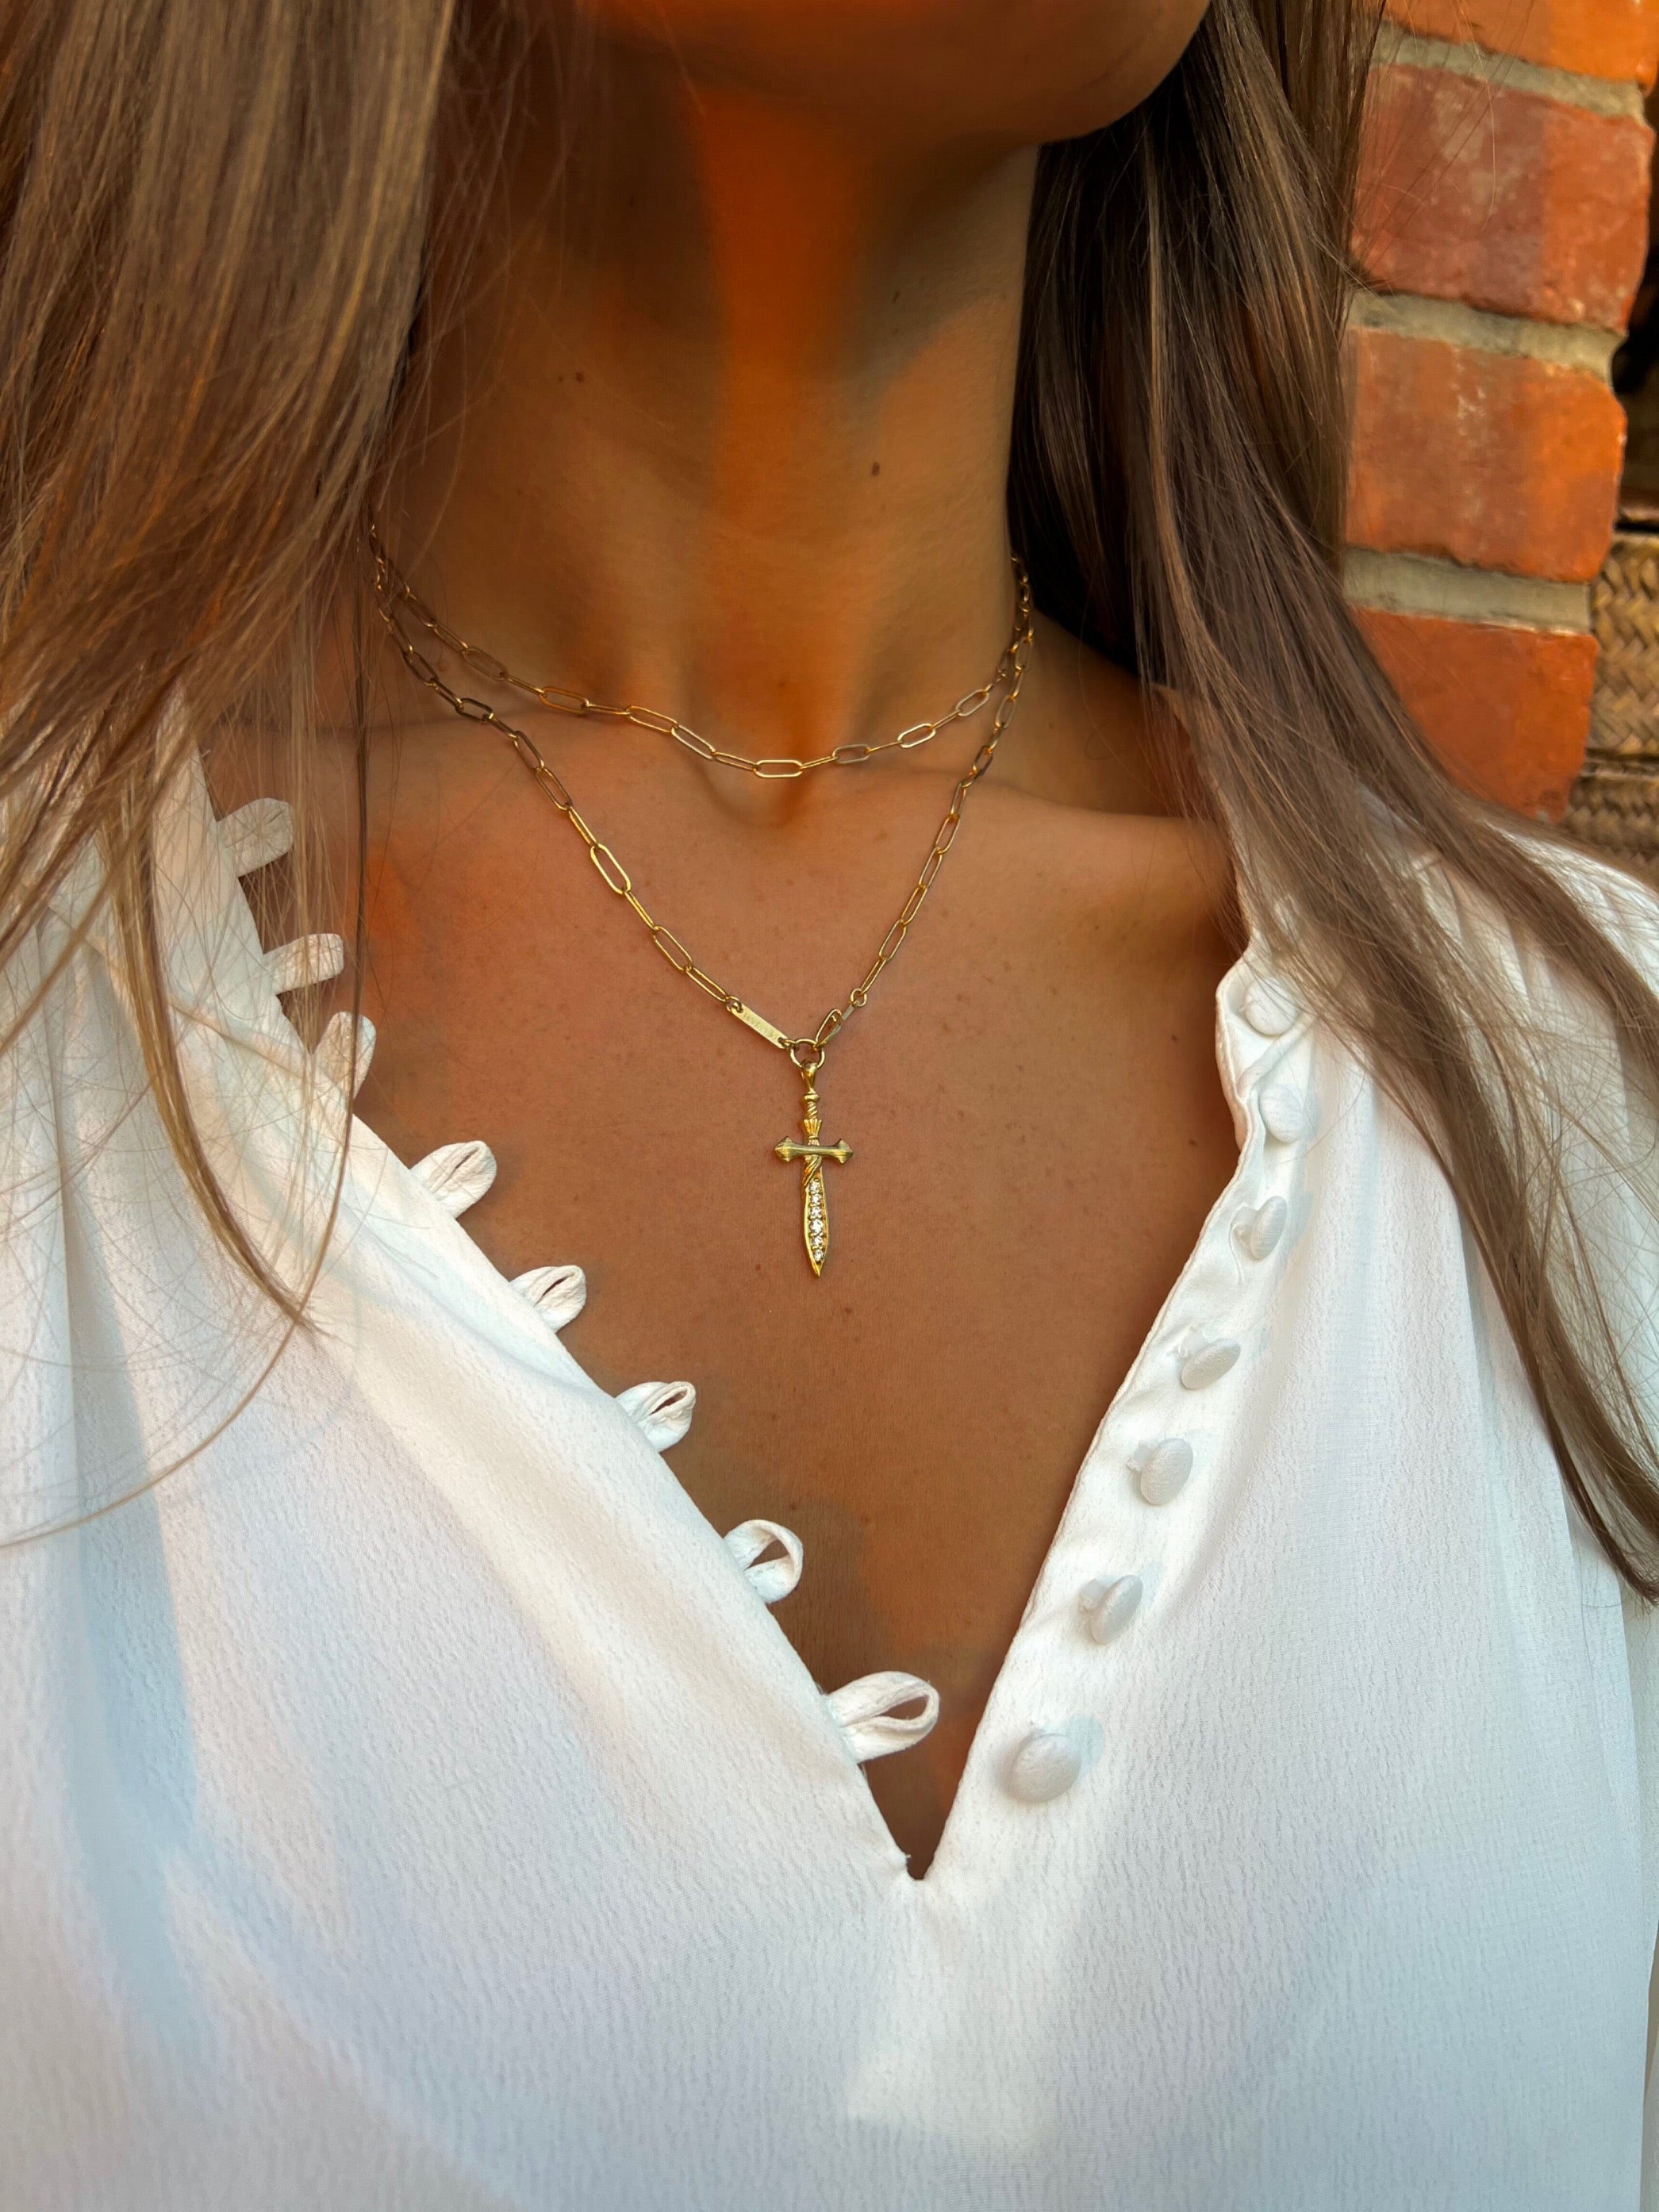 gold plated wrap around necklace with link chain and sword pendant hanka in layering necklace